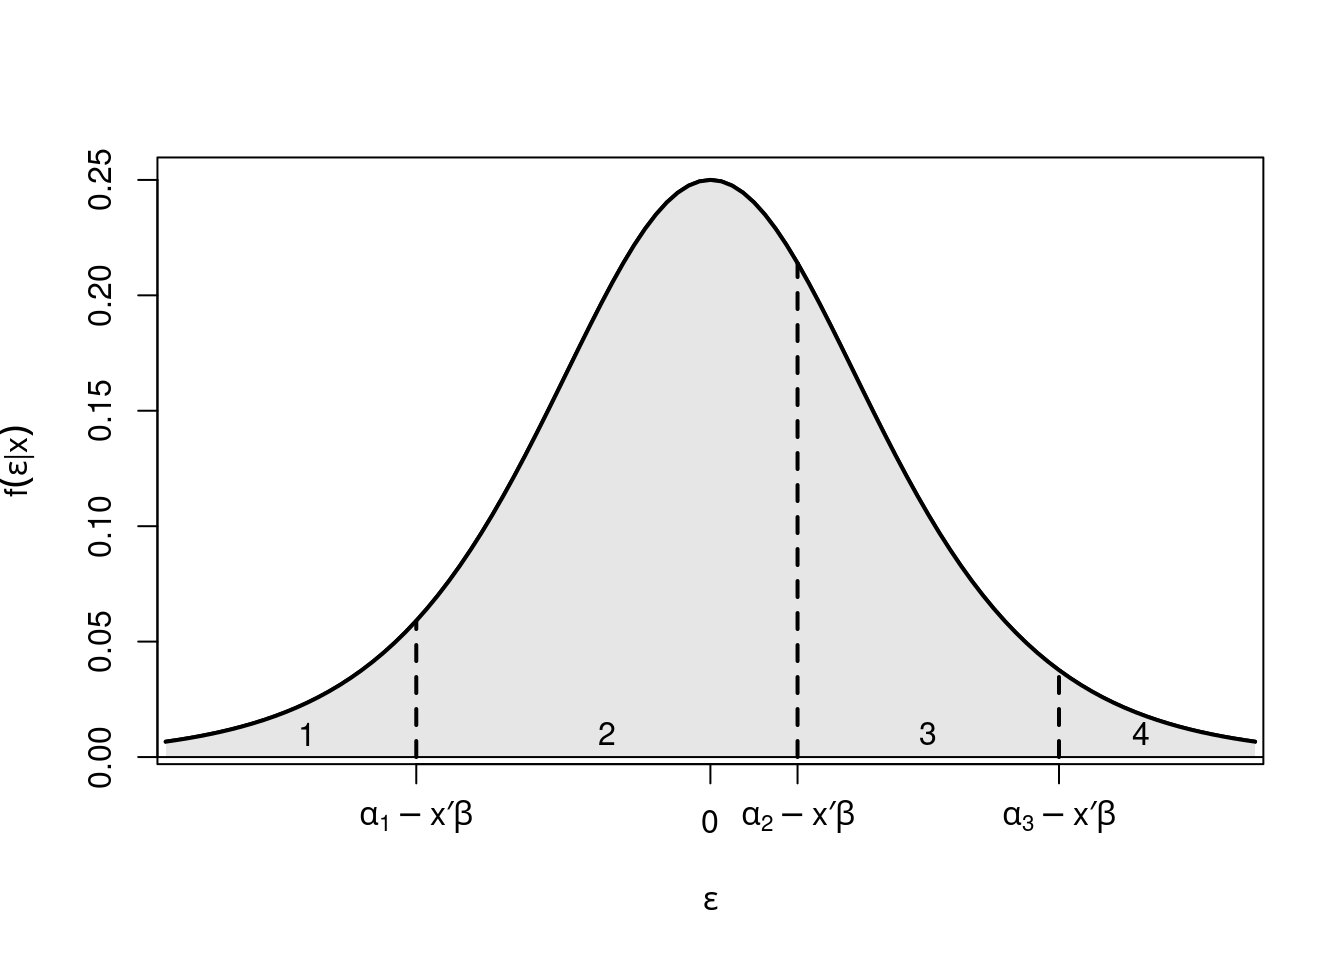 Distribution of the error term divided into four categories